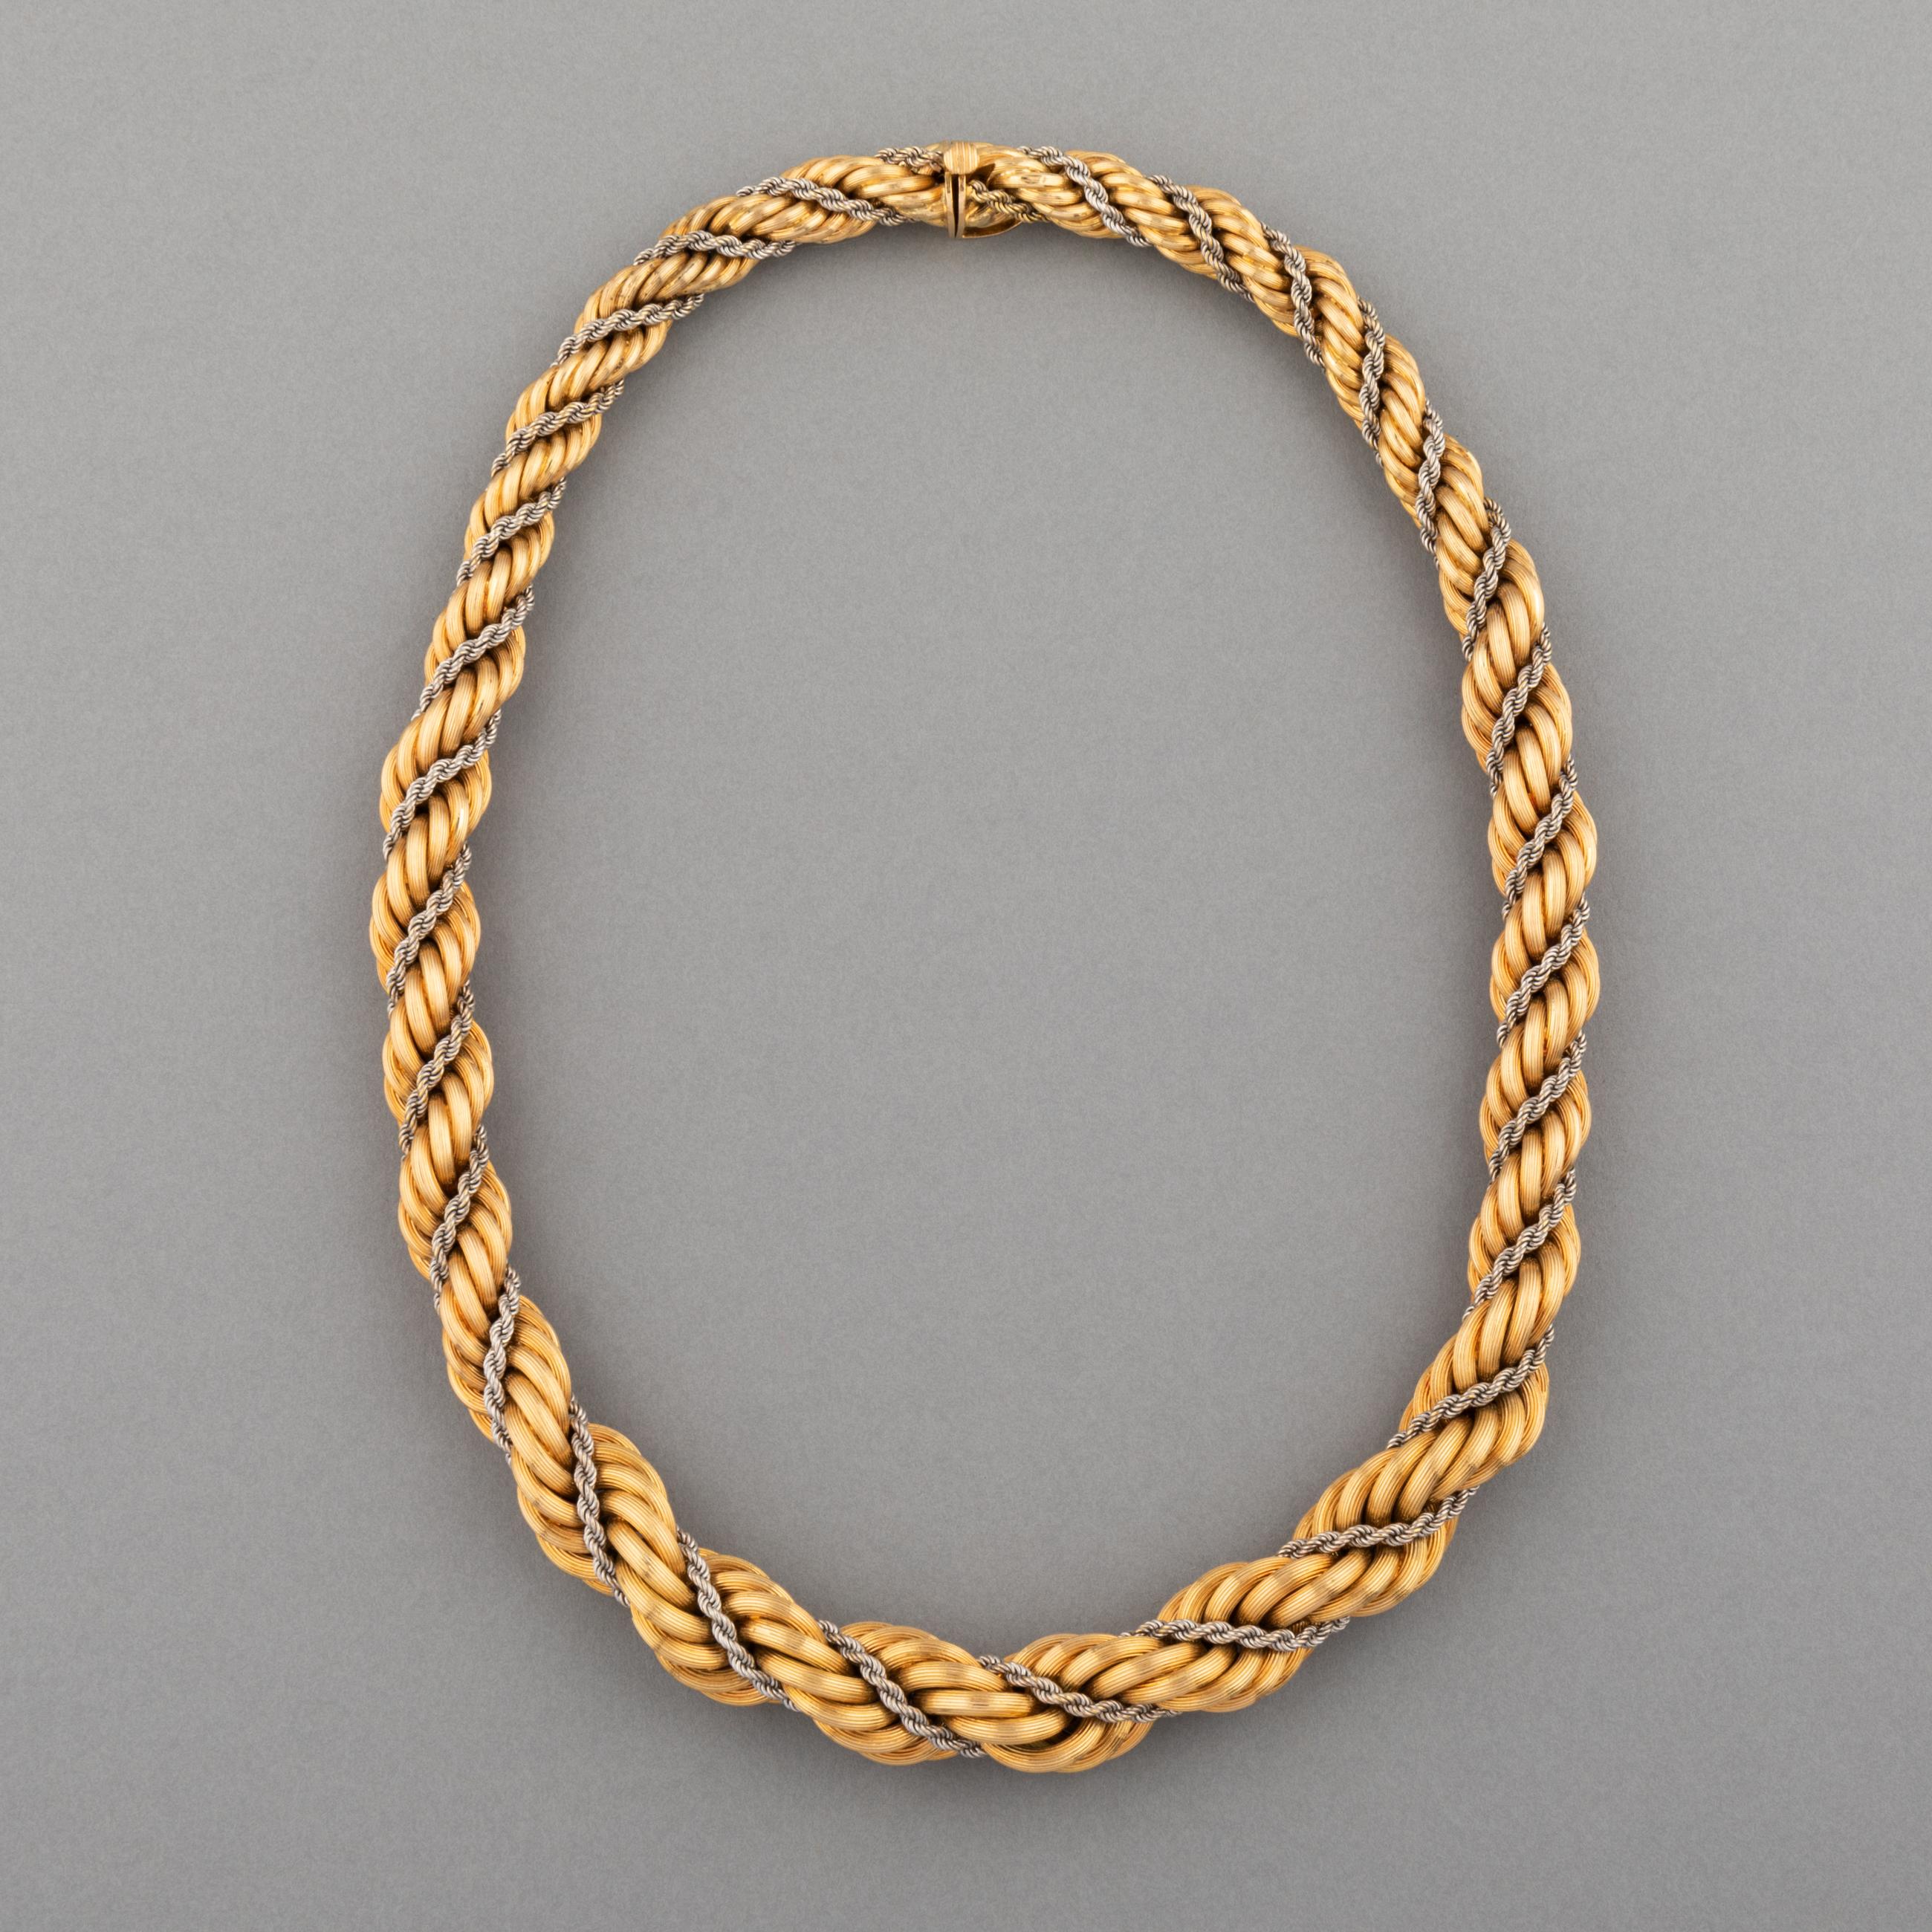 A very lovely vintage necklace, European made circa 1960.

Made in yellow and white gold 18K. Hallmarks for gold and maker (Unknown).

The weight is 85.4 grams. 

The length is 44.5 cm.

The width is from 9mm to 14mm.